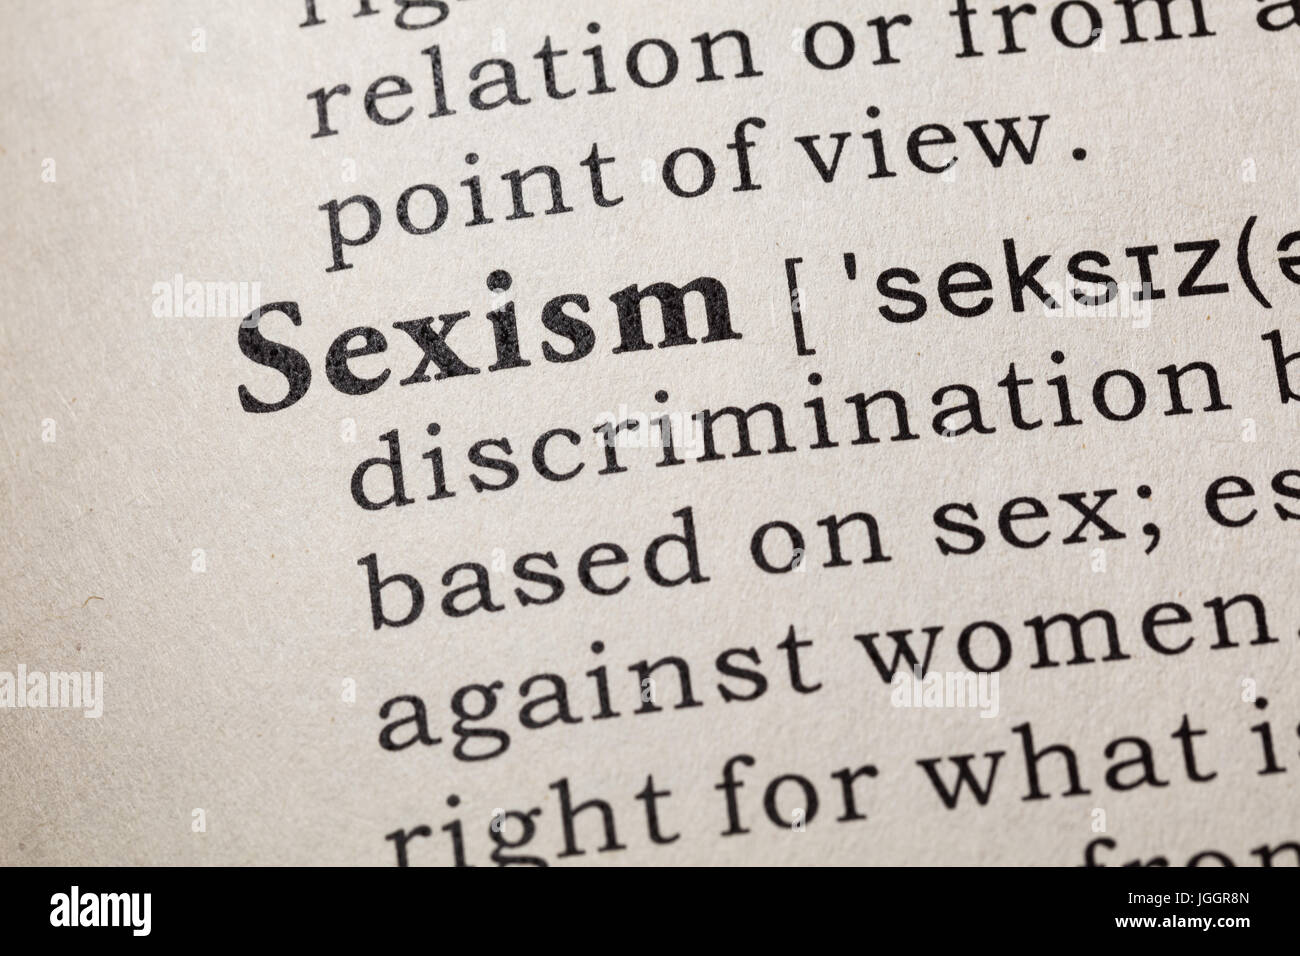 Fake Dictionary, Dictionary definition of the word Sexism. including key descriptive words. Stock Photo